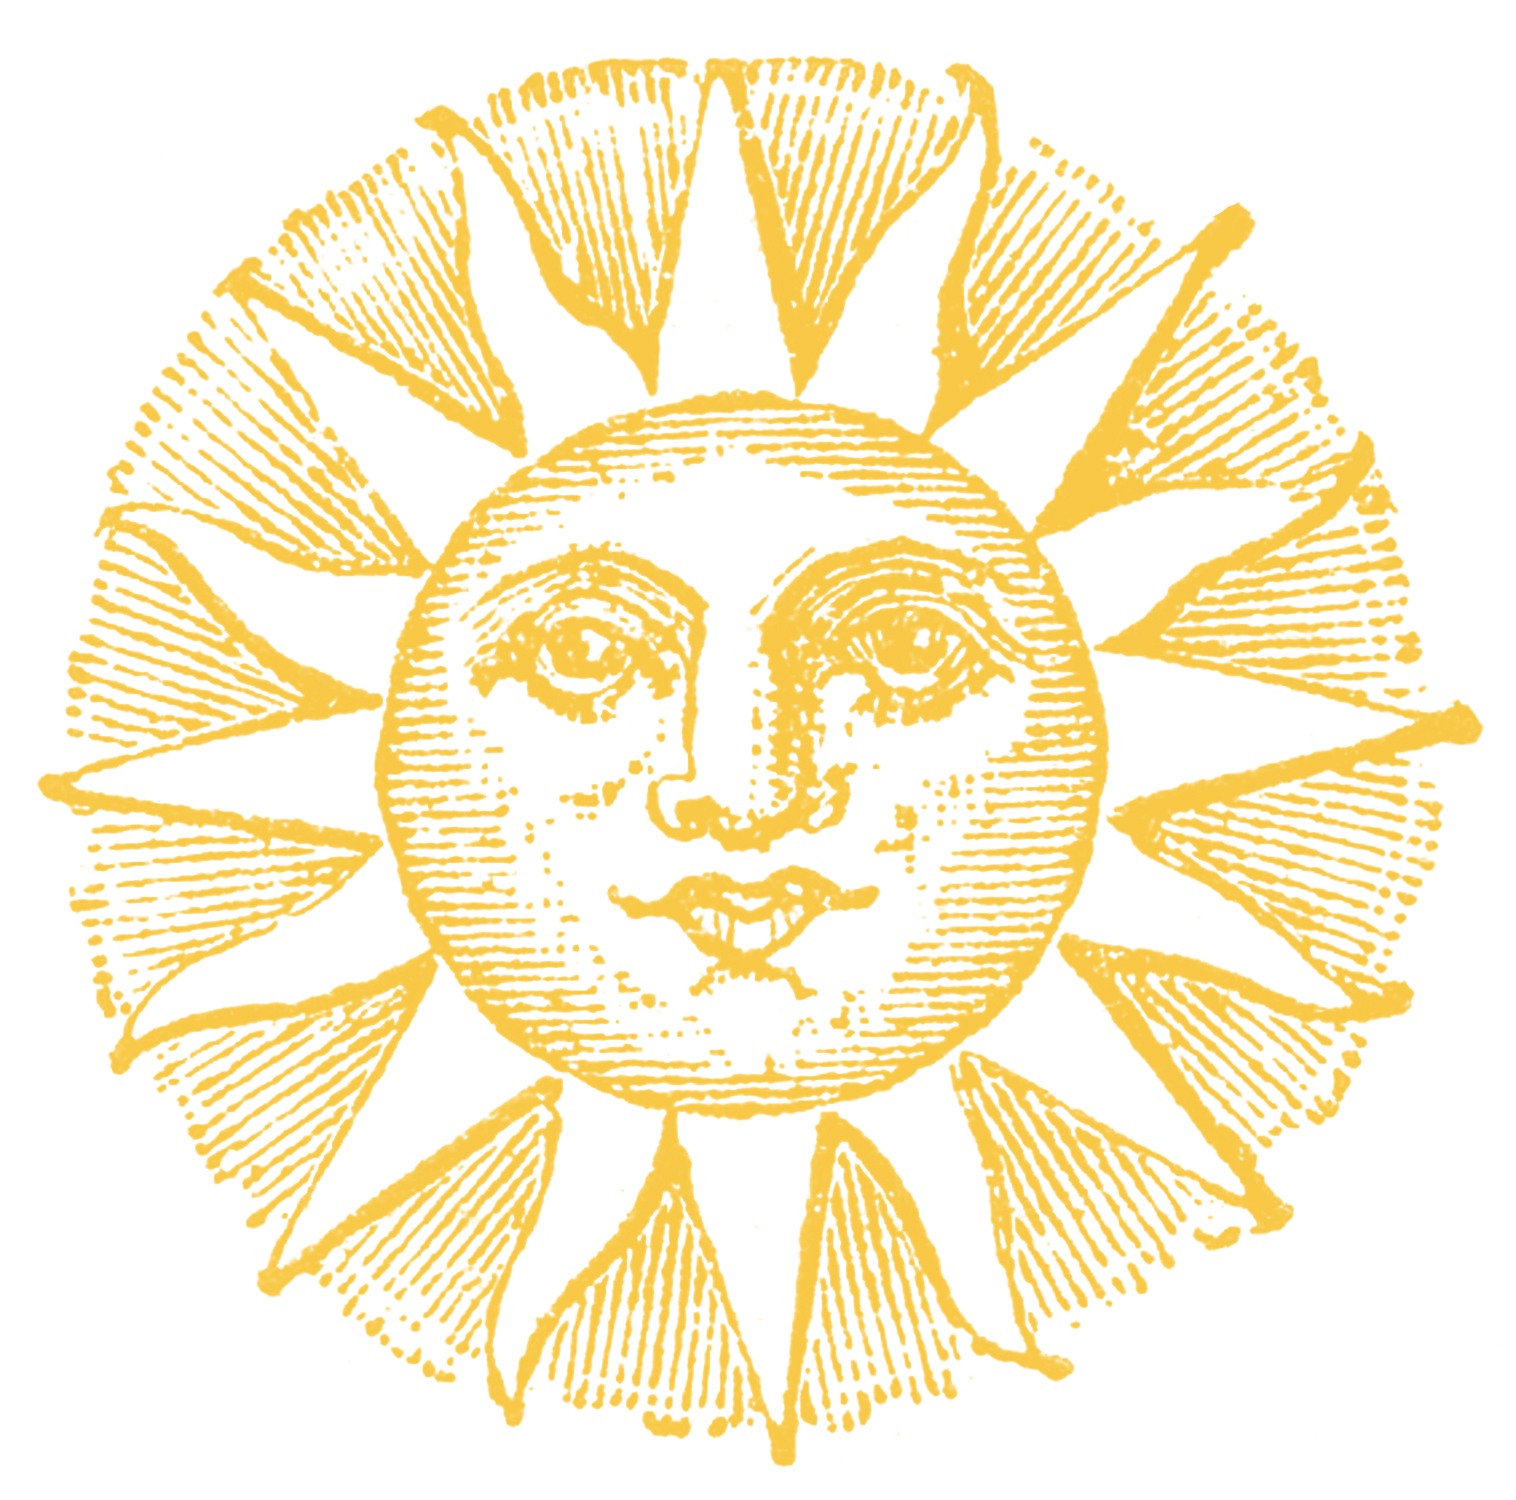 Vintage Clip Art - Old Fashioned Sun with Face - The ...